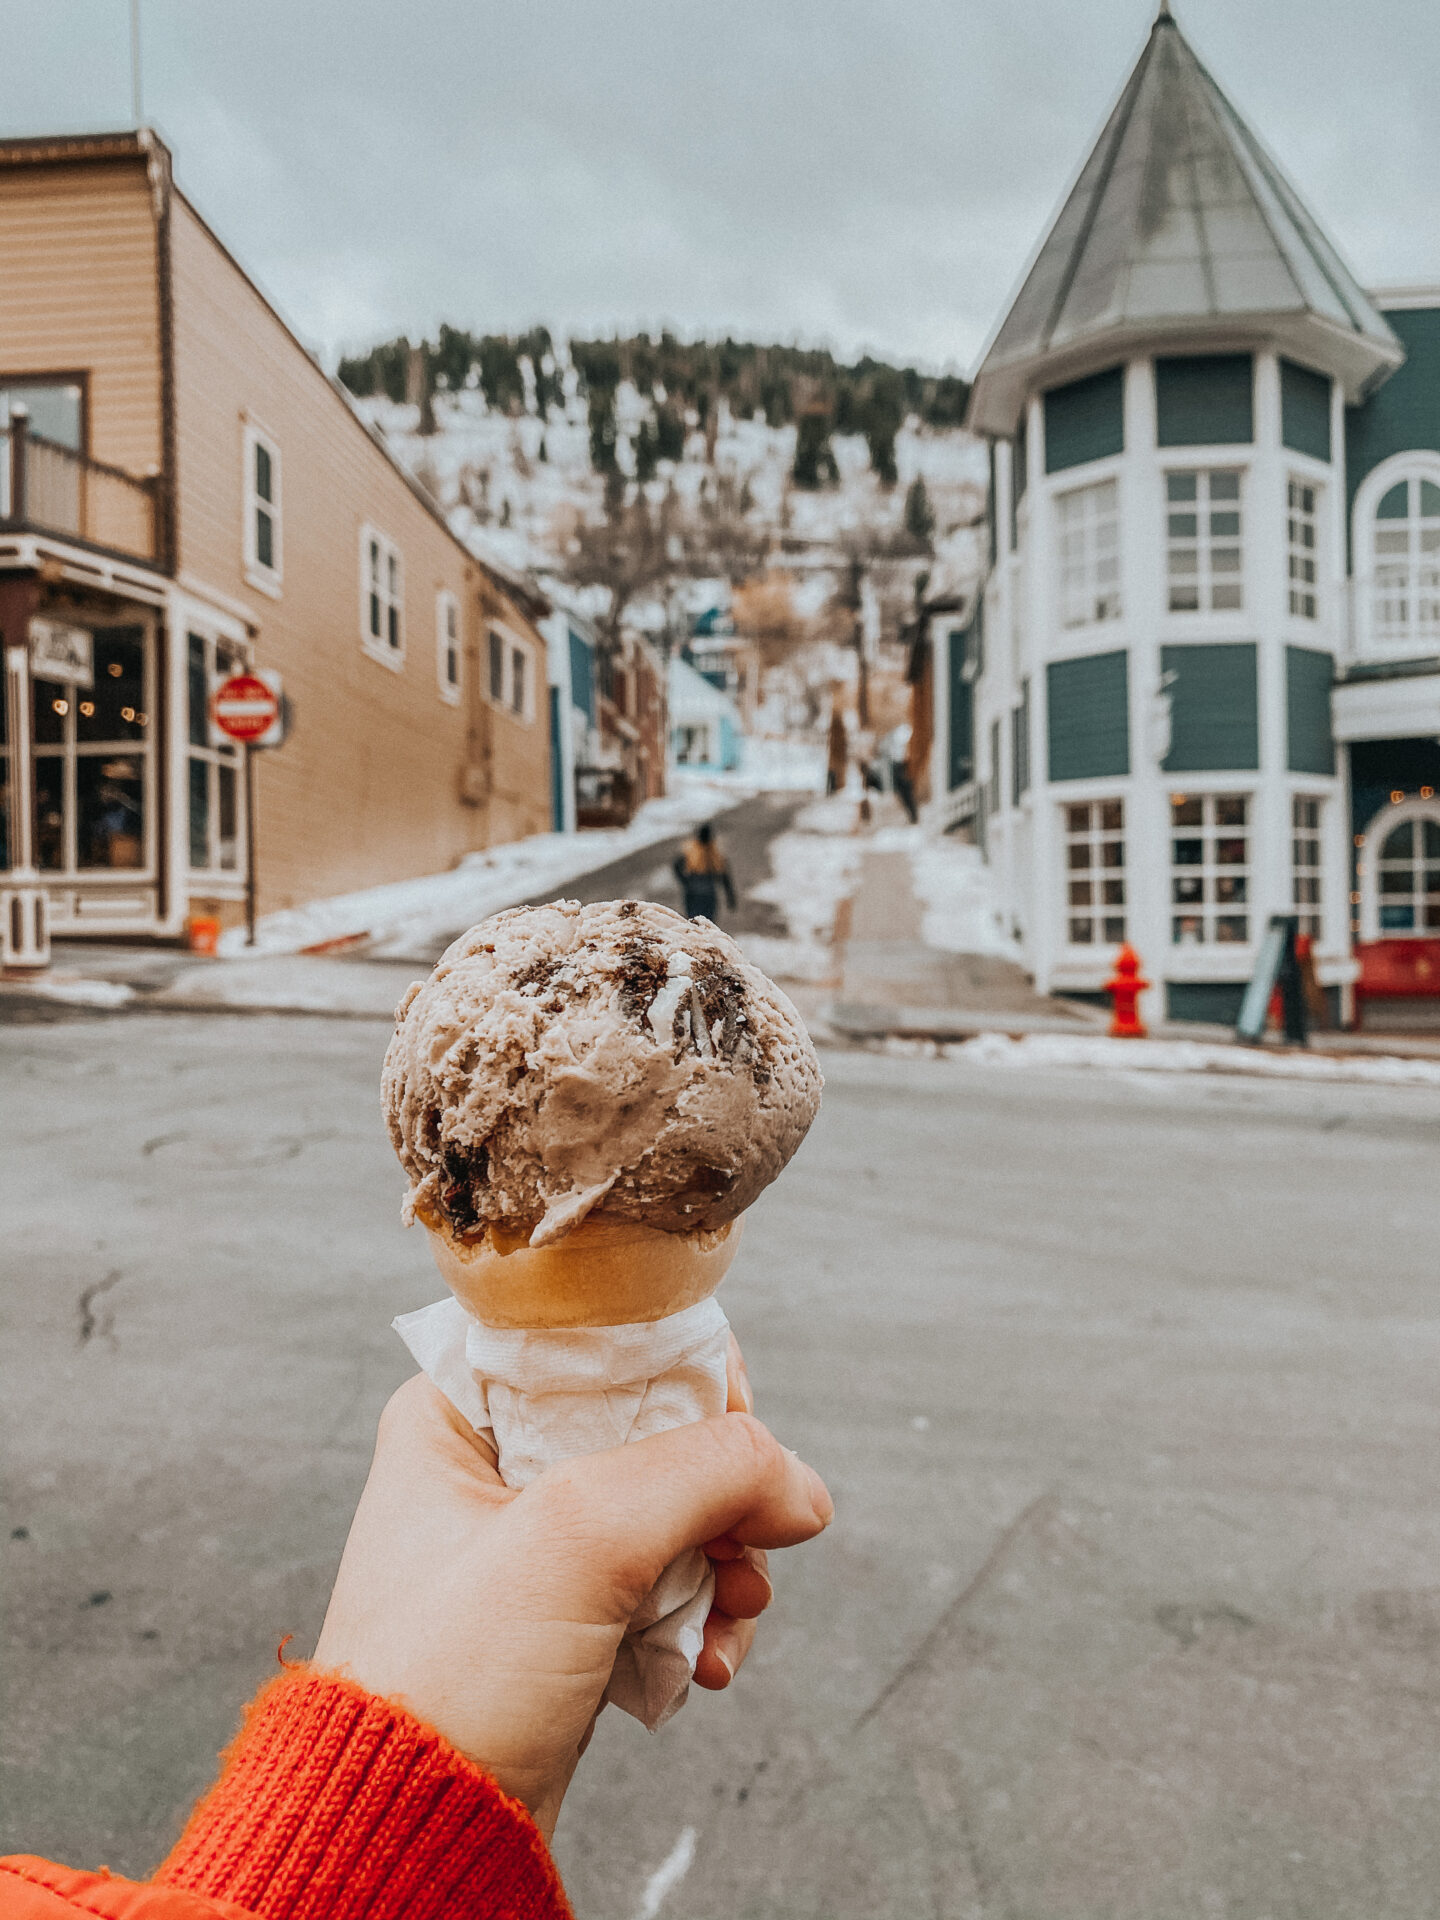 How to spend 1 week in Park City, Utah: Park City Travel Guide - Park City restaurants and food